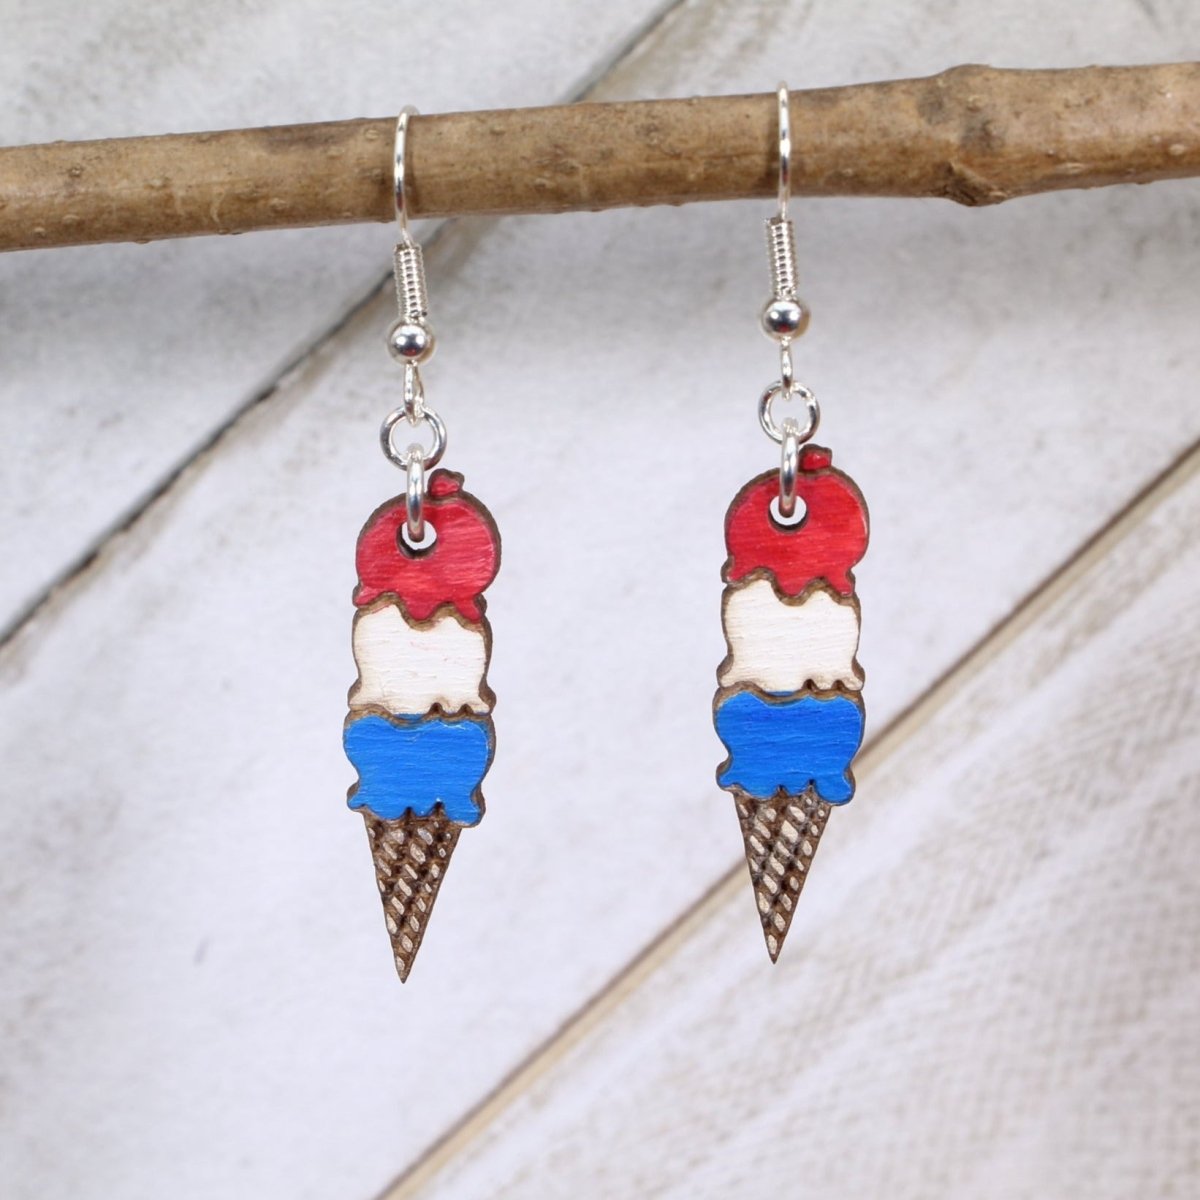 Ice Cream Cone Wooden Dangle Earrings - Red White & Blue - Cate's Concepts, LLC